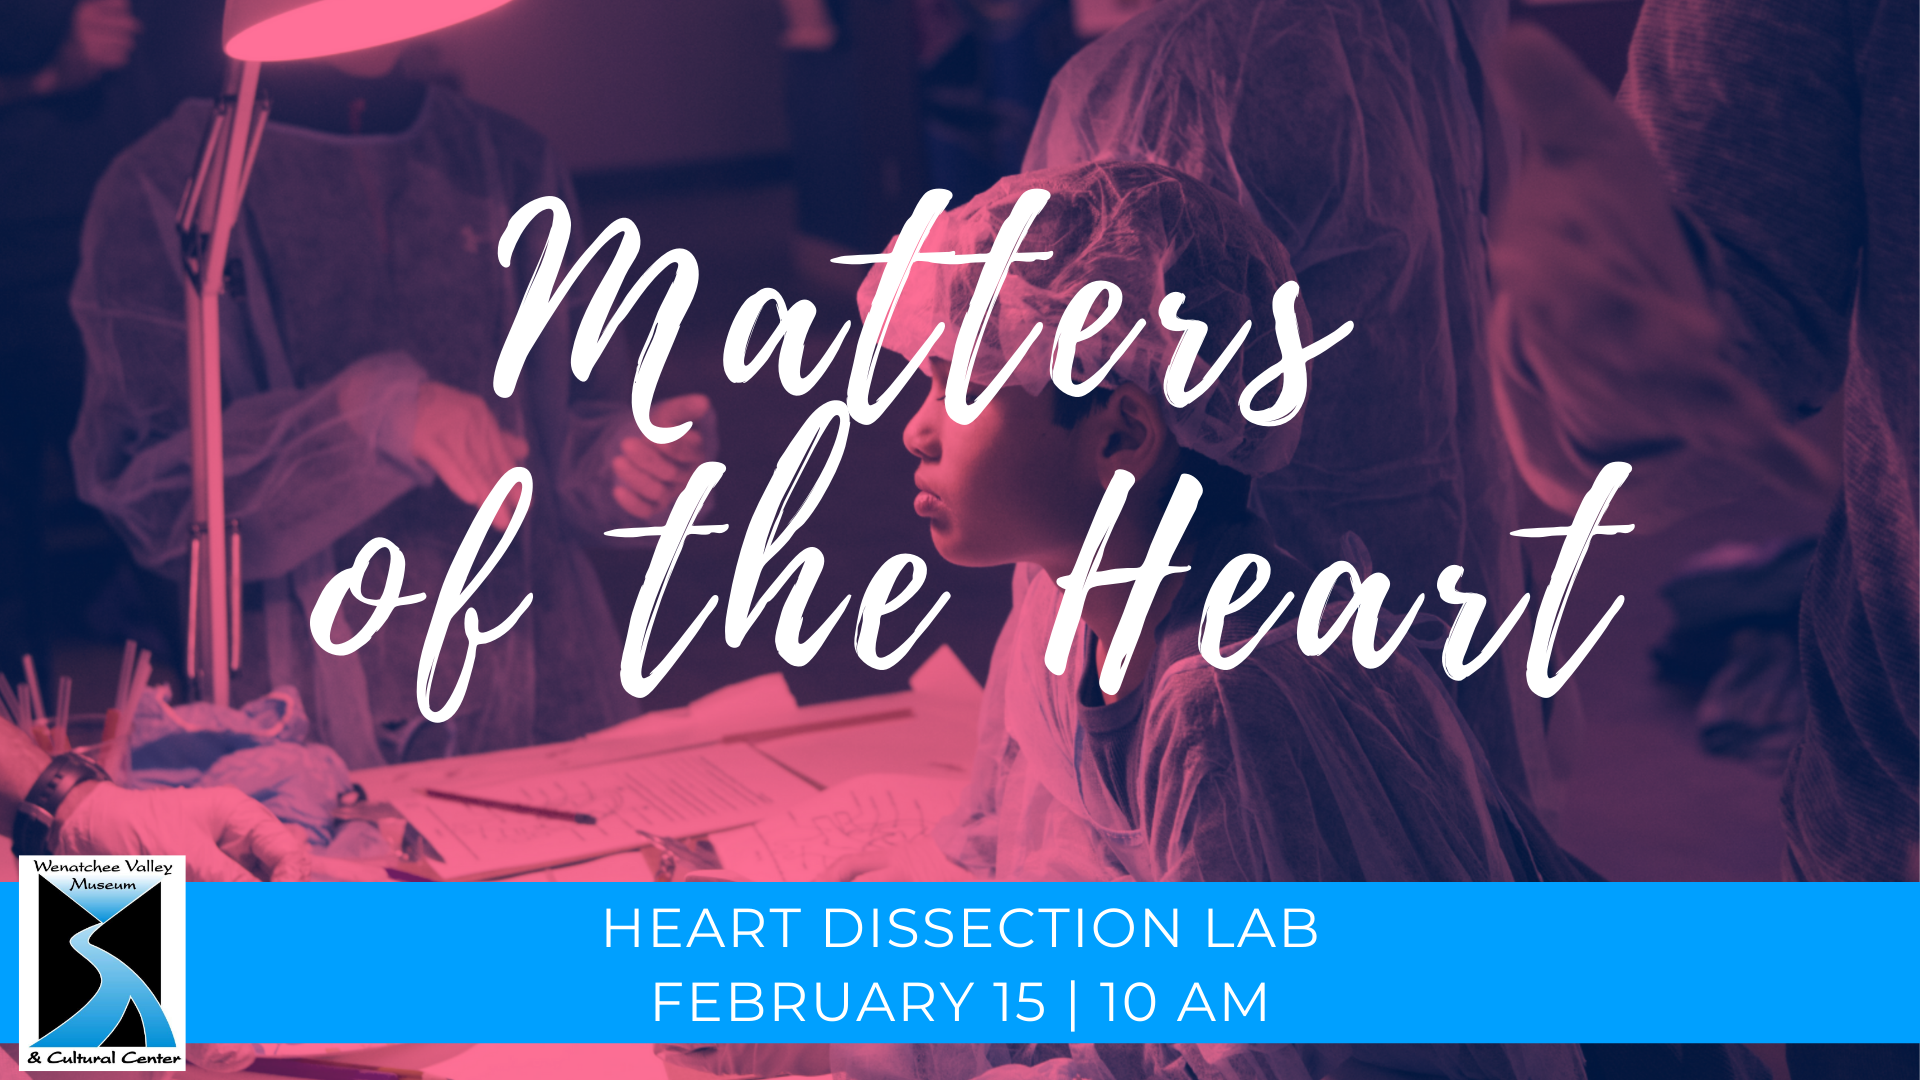 Heart Dissection Lab February 15